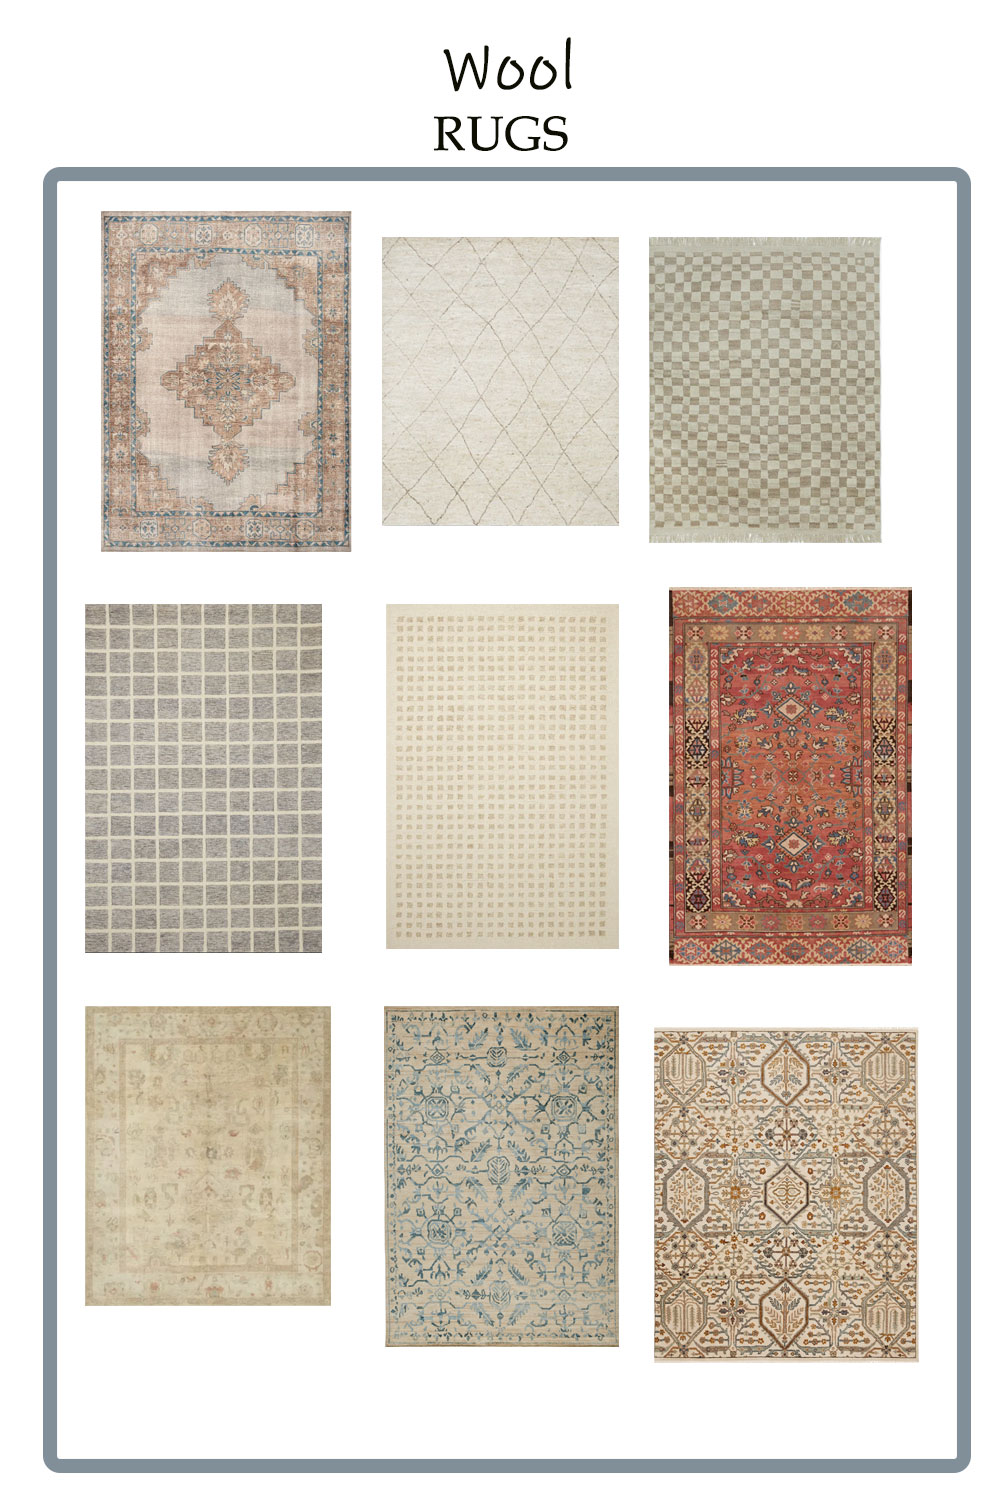 9 wool rugs on a white background